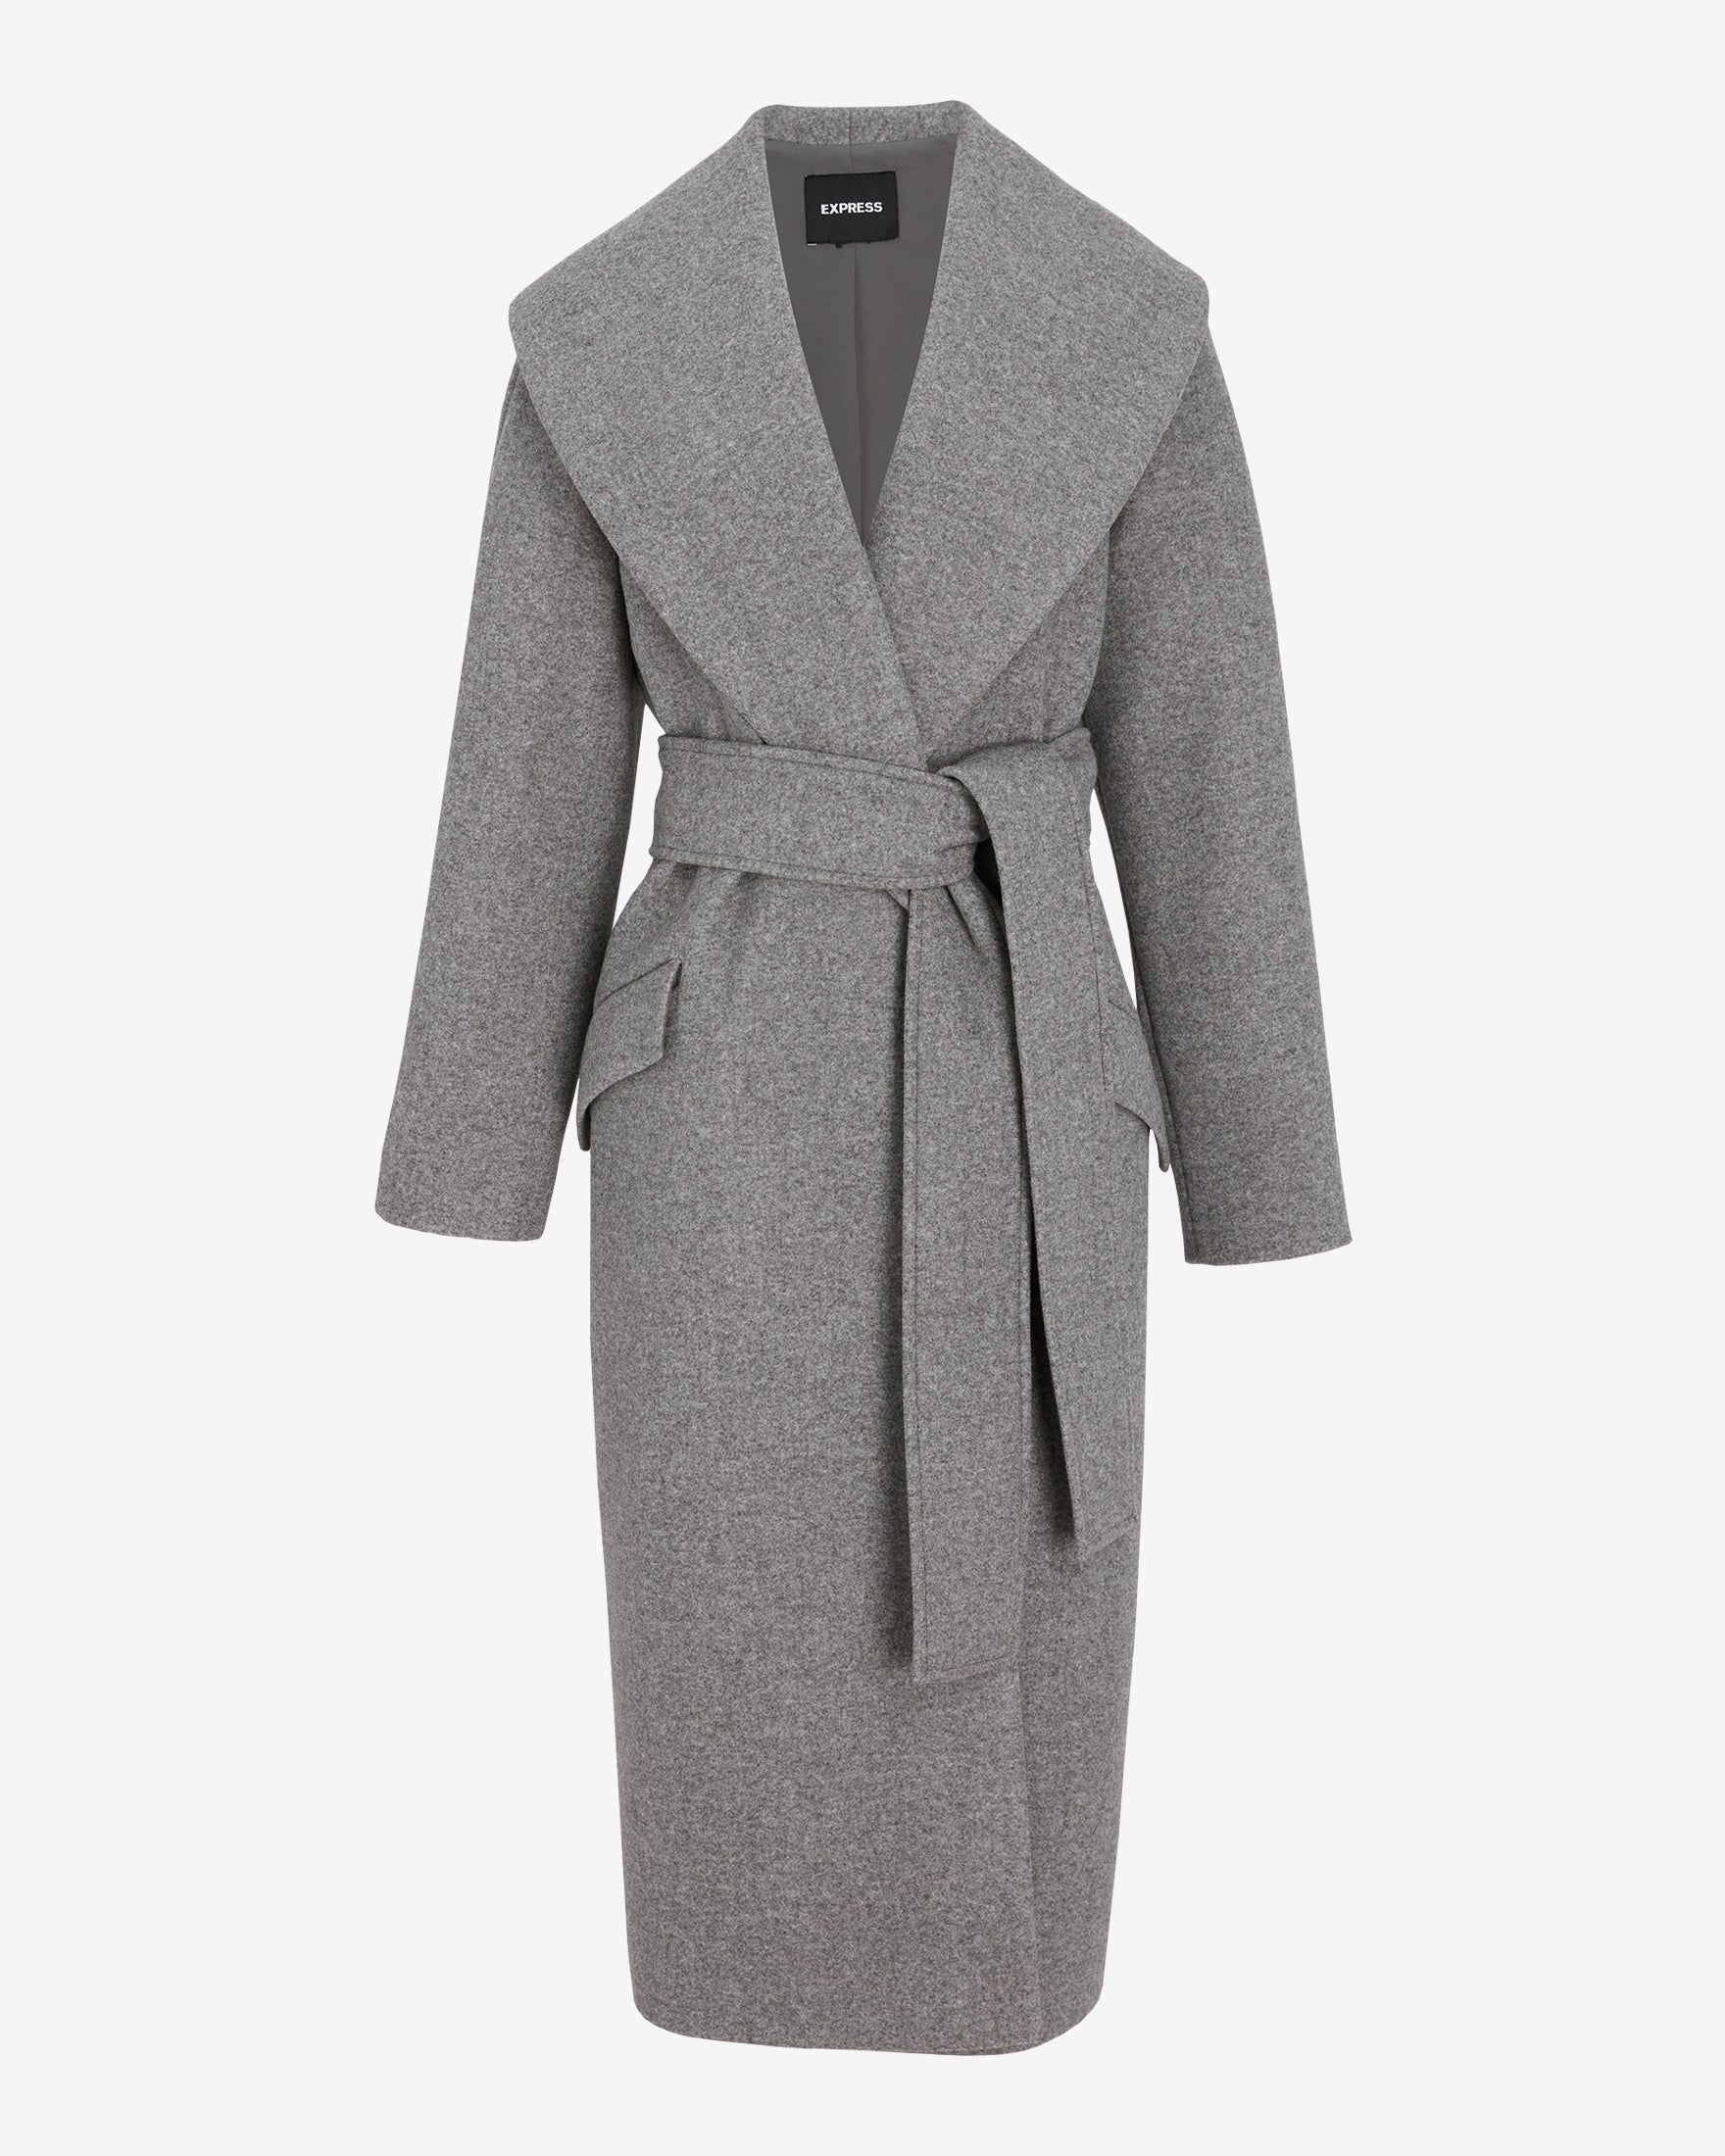 Long gray coat with tie at waist and pockets